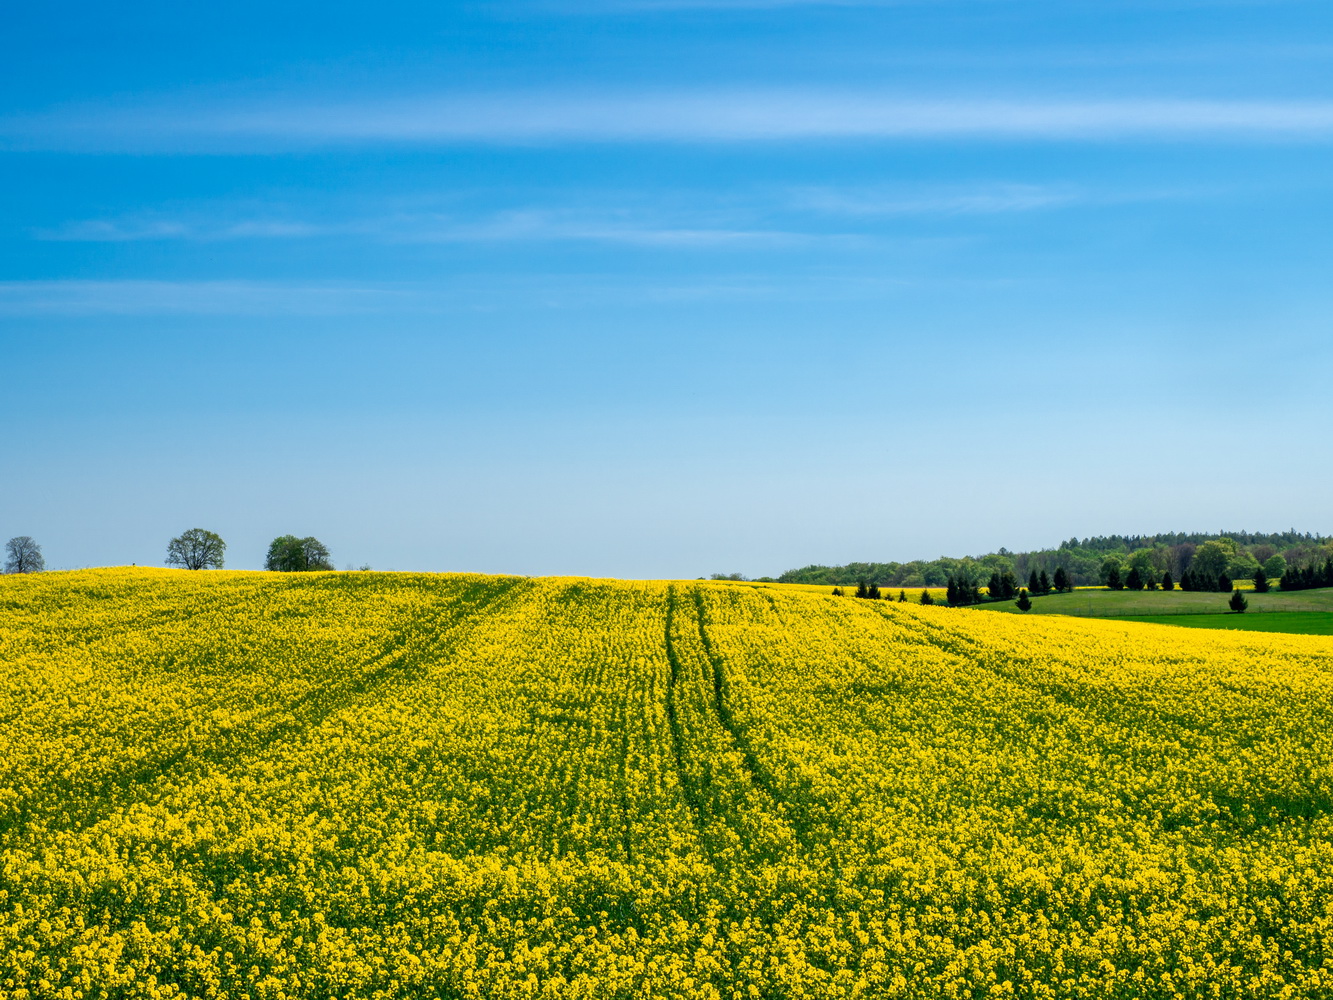 Countryside view of a blooming yellow field on a hill under a clear blue sky